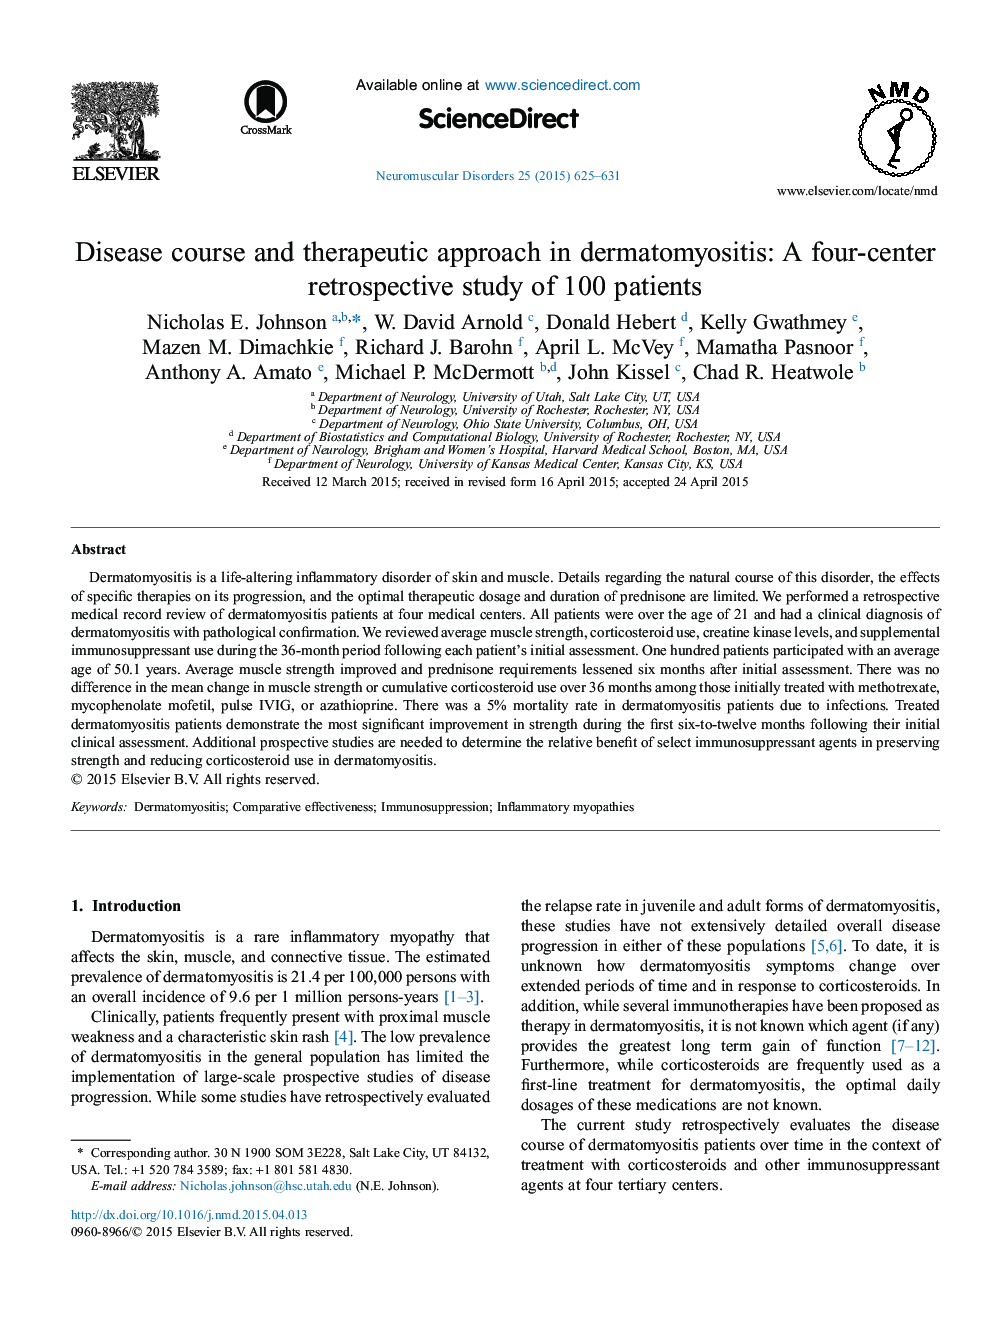 Disease course and therapeutic approach in dermatomyositis: A four-center retrospective study of 100 patients